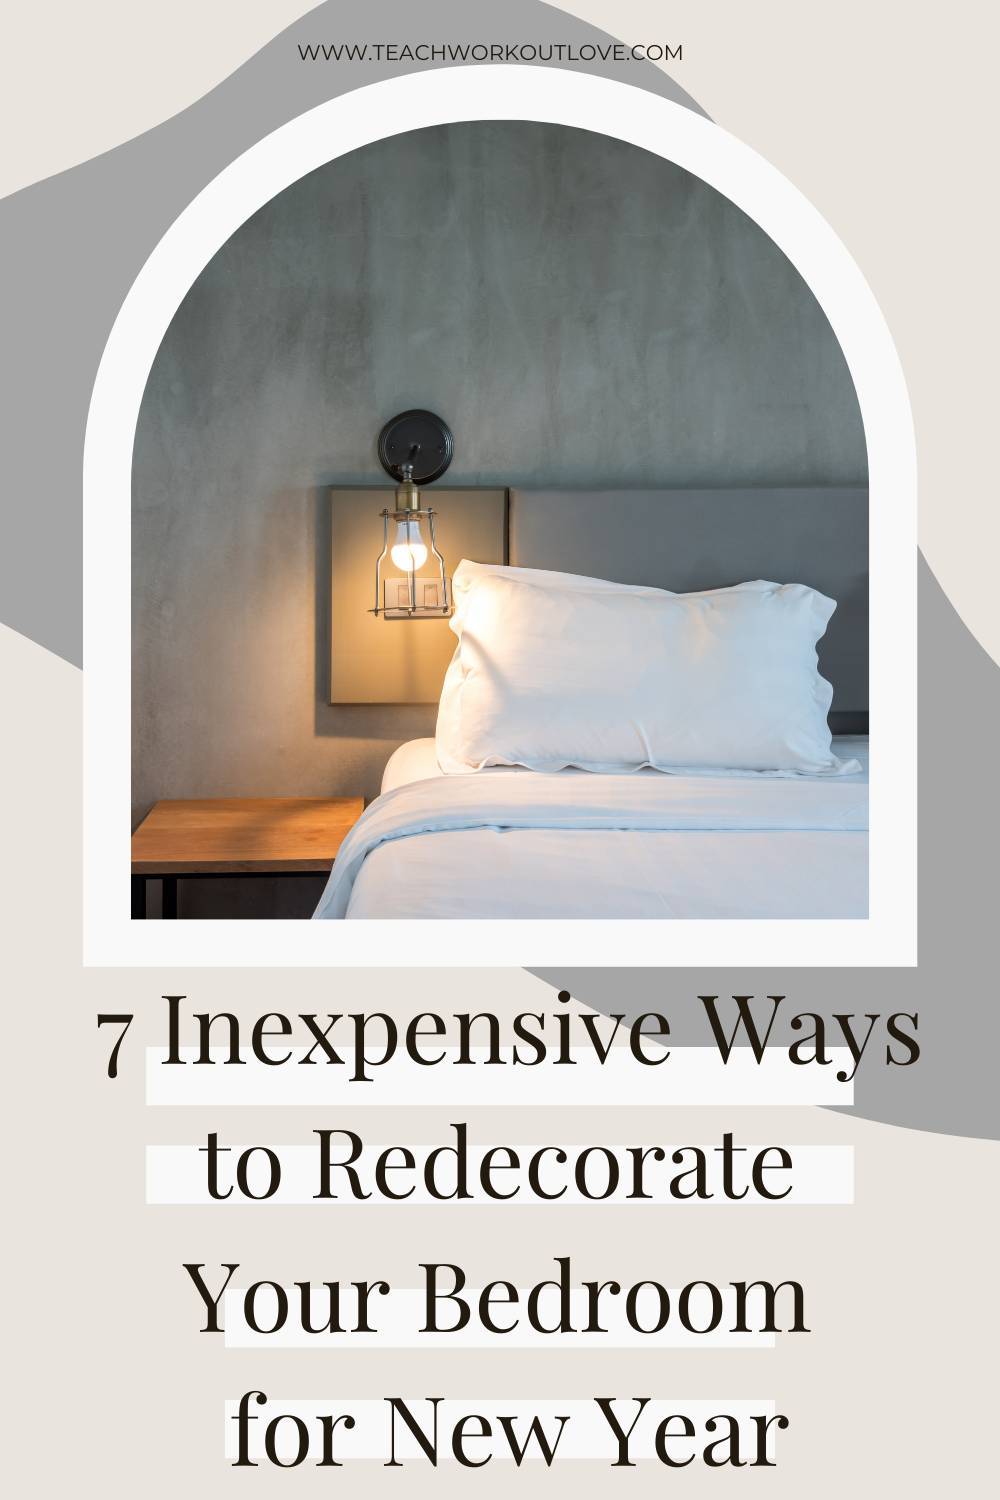 Follow this 7 easy tips to decorate your bedroom on budget for 2021. These tips will help you to decorate your bedroom in low budget.